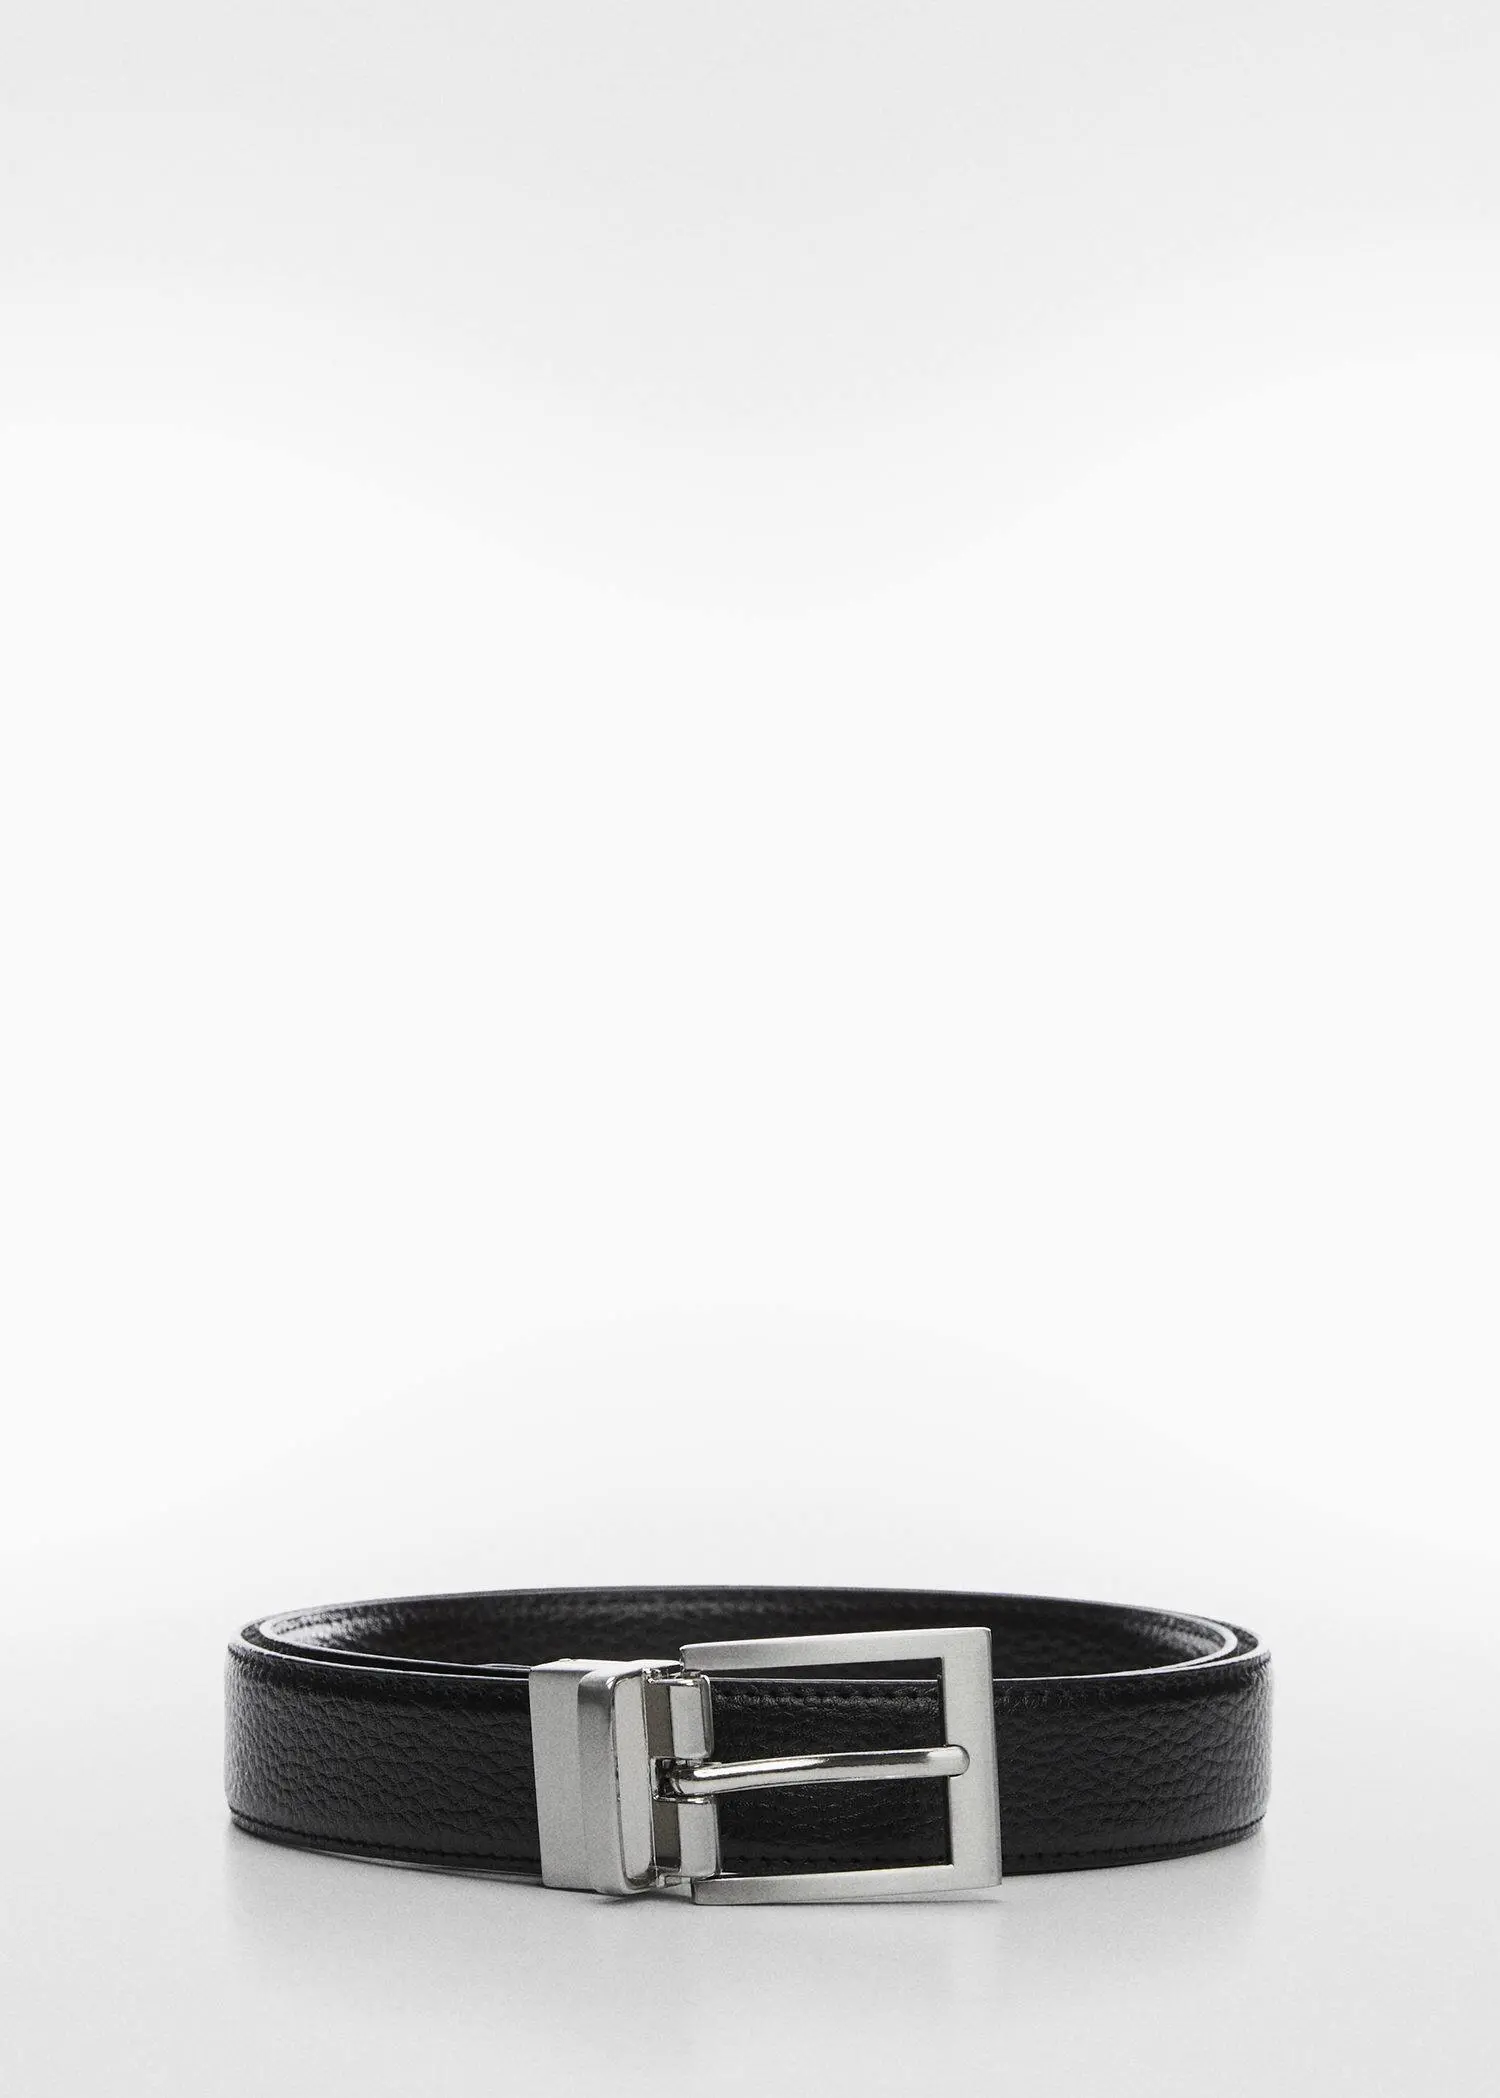 Mango Dress with leather belt. a close-up of a black belt with a silver buckle. 